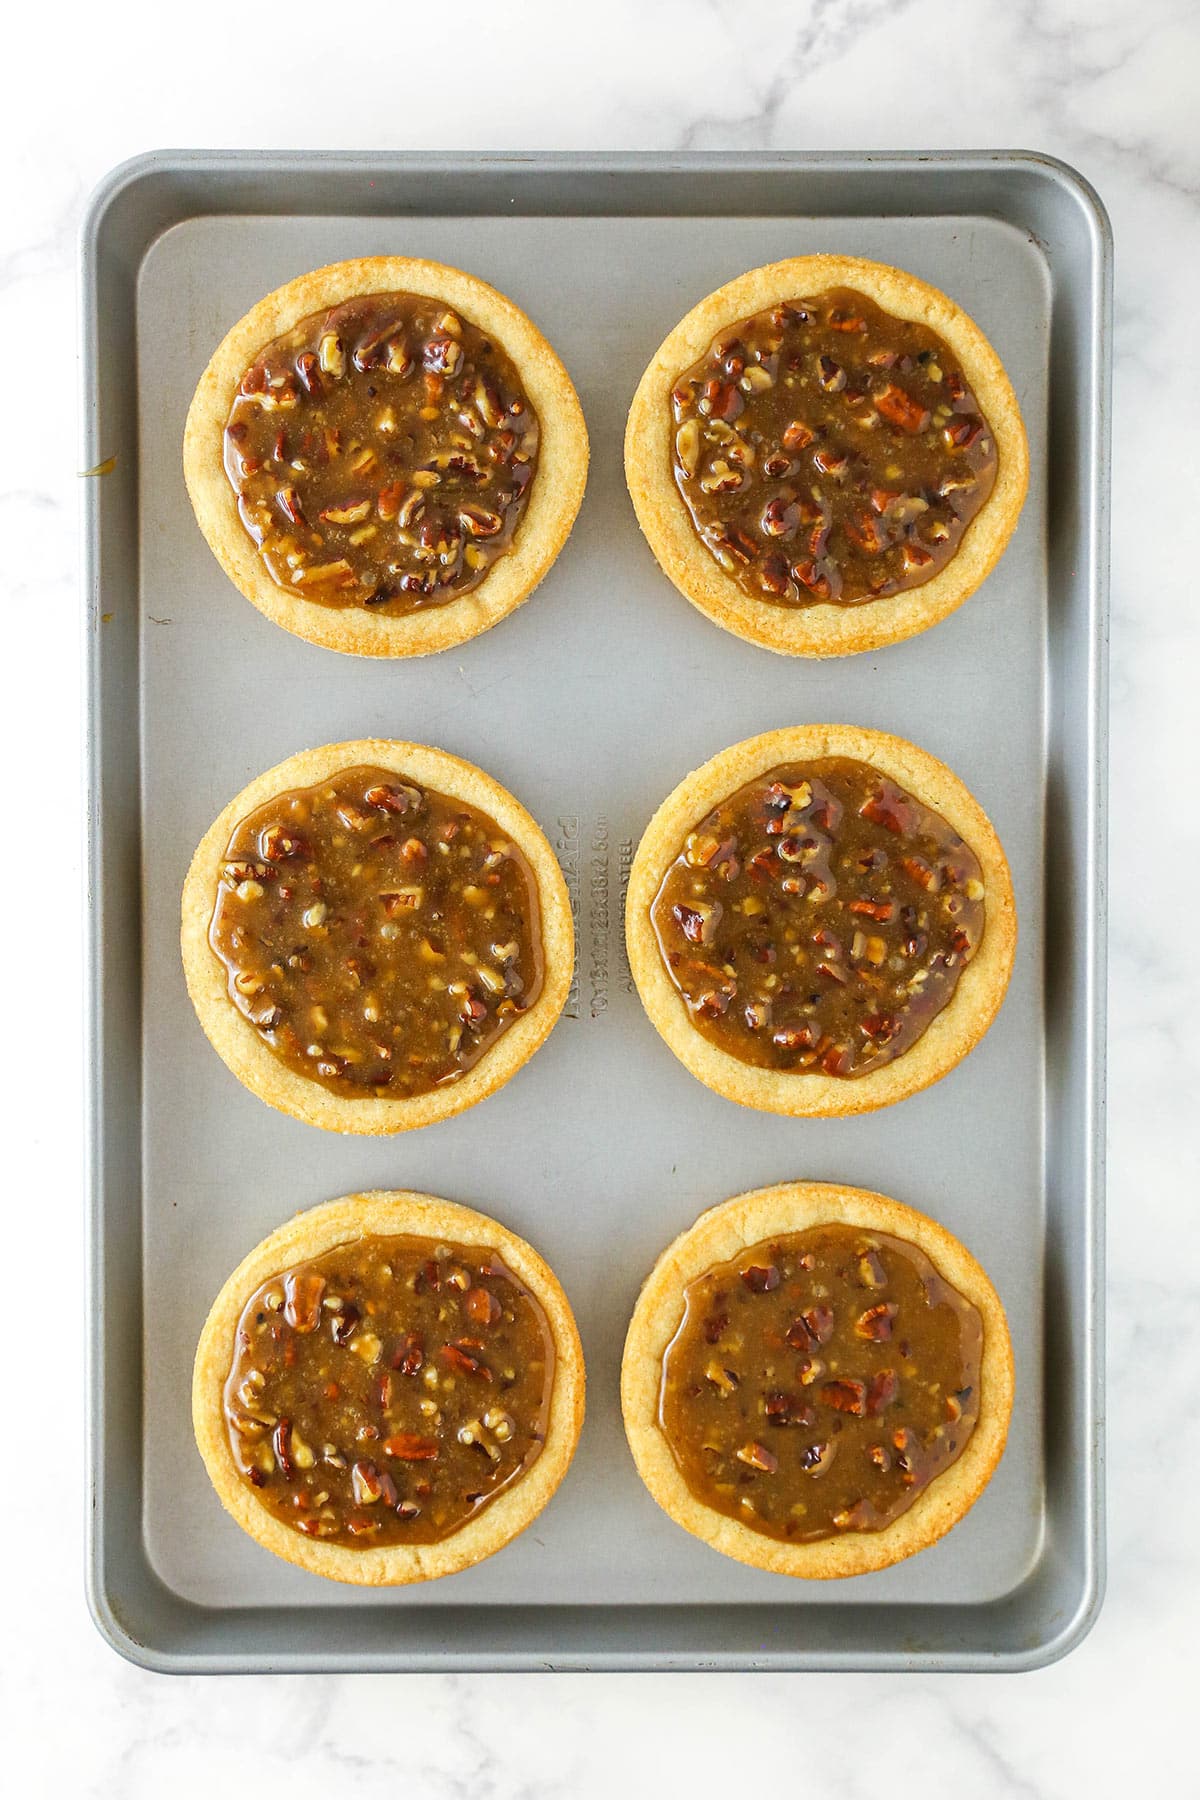 Six pecan pie cookies on a metal baking sheet on top of a kitchen counter